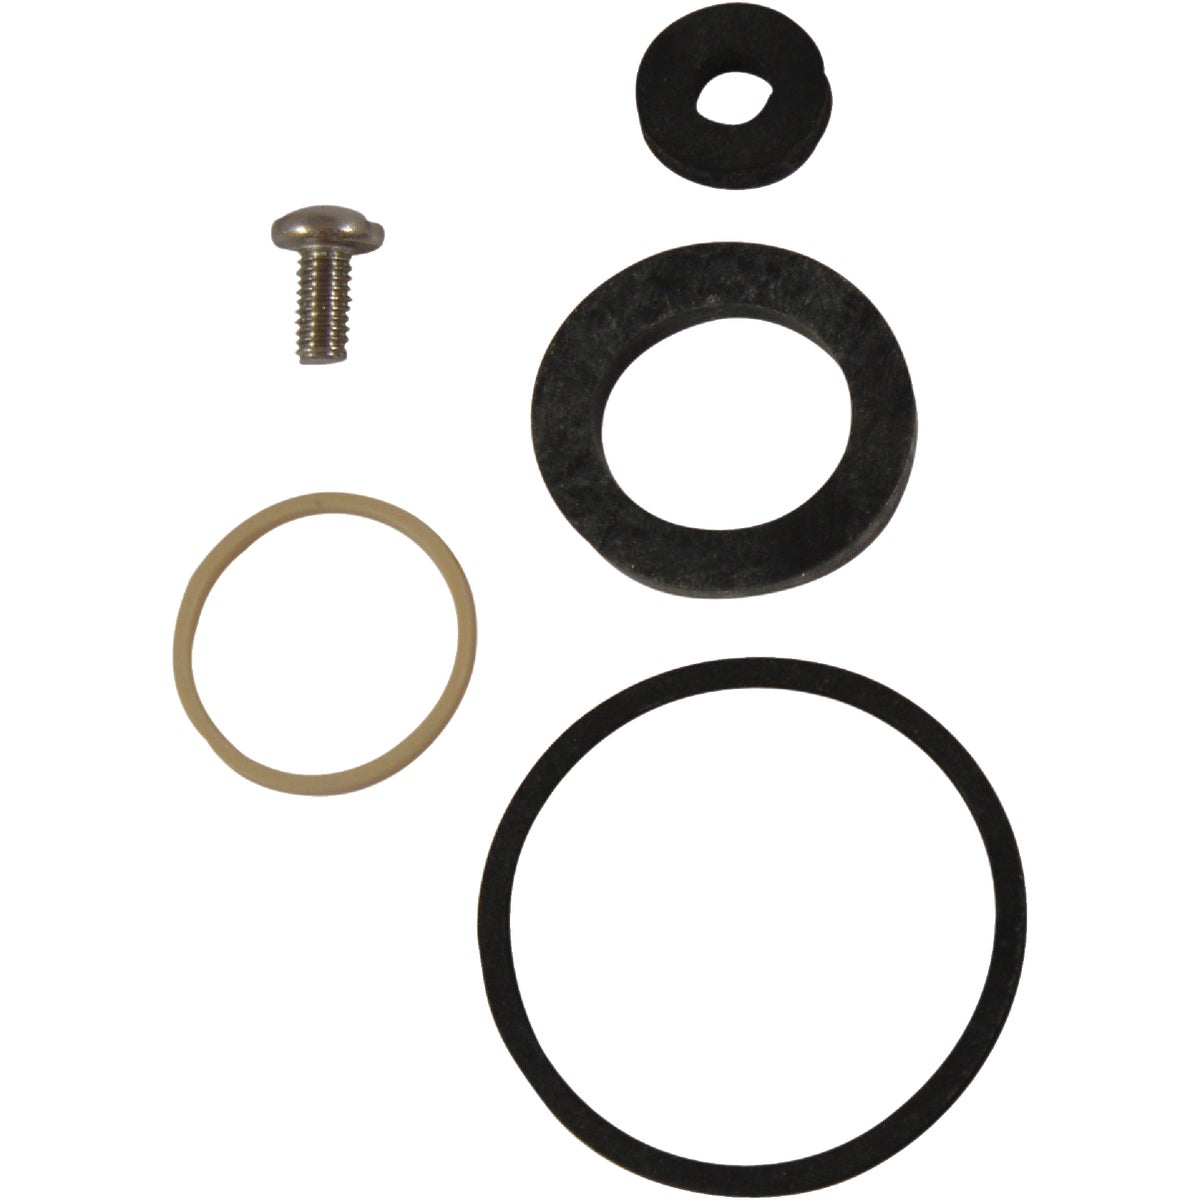 Item 402521, Repair kit for Symmons TempTrol tub and shower faucets.